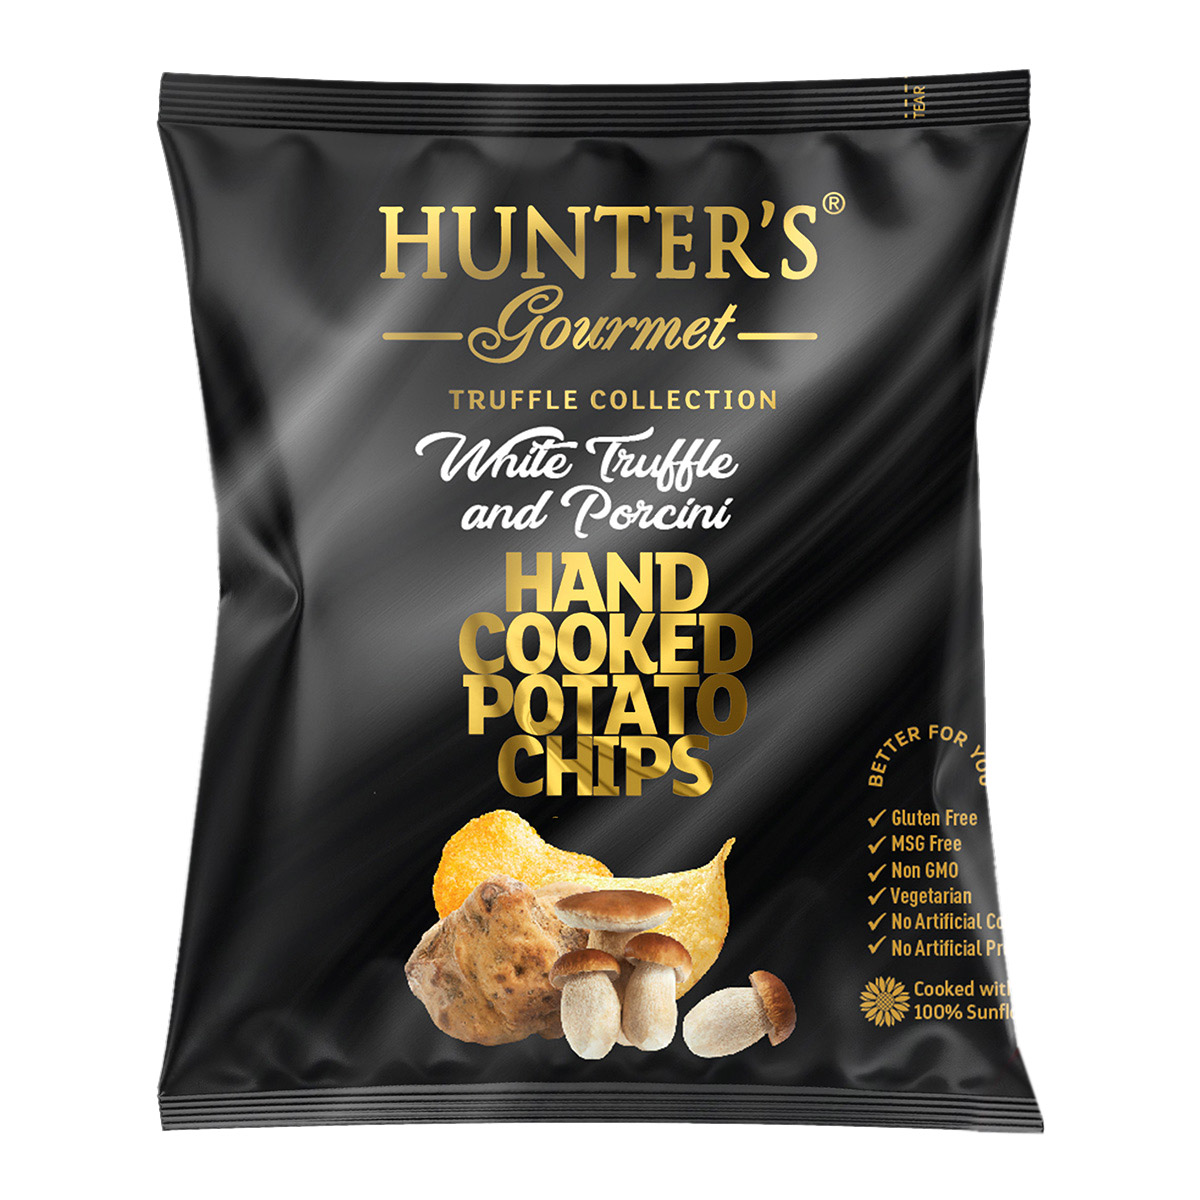 Hunter’s Gourmet Hand Cooked Potato Chips – Black Truffle and Parmesan – Truffle Collection (25gm)